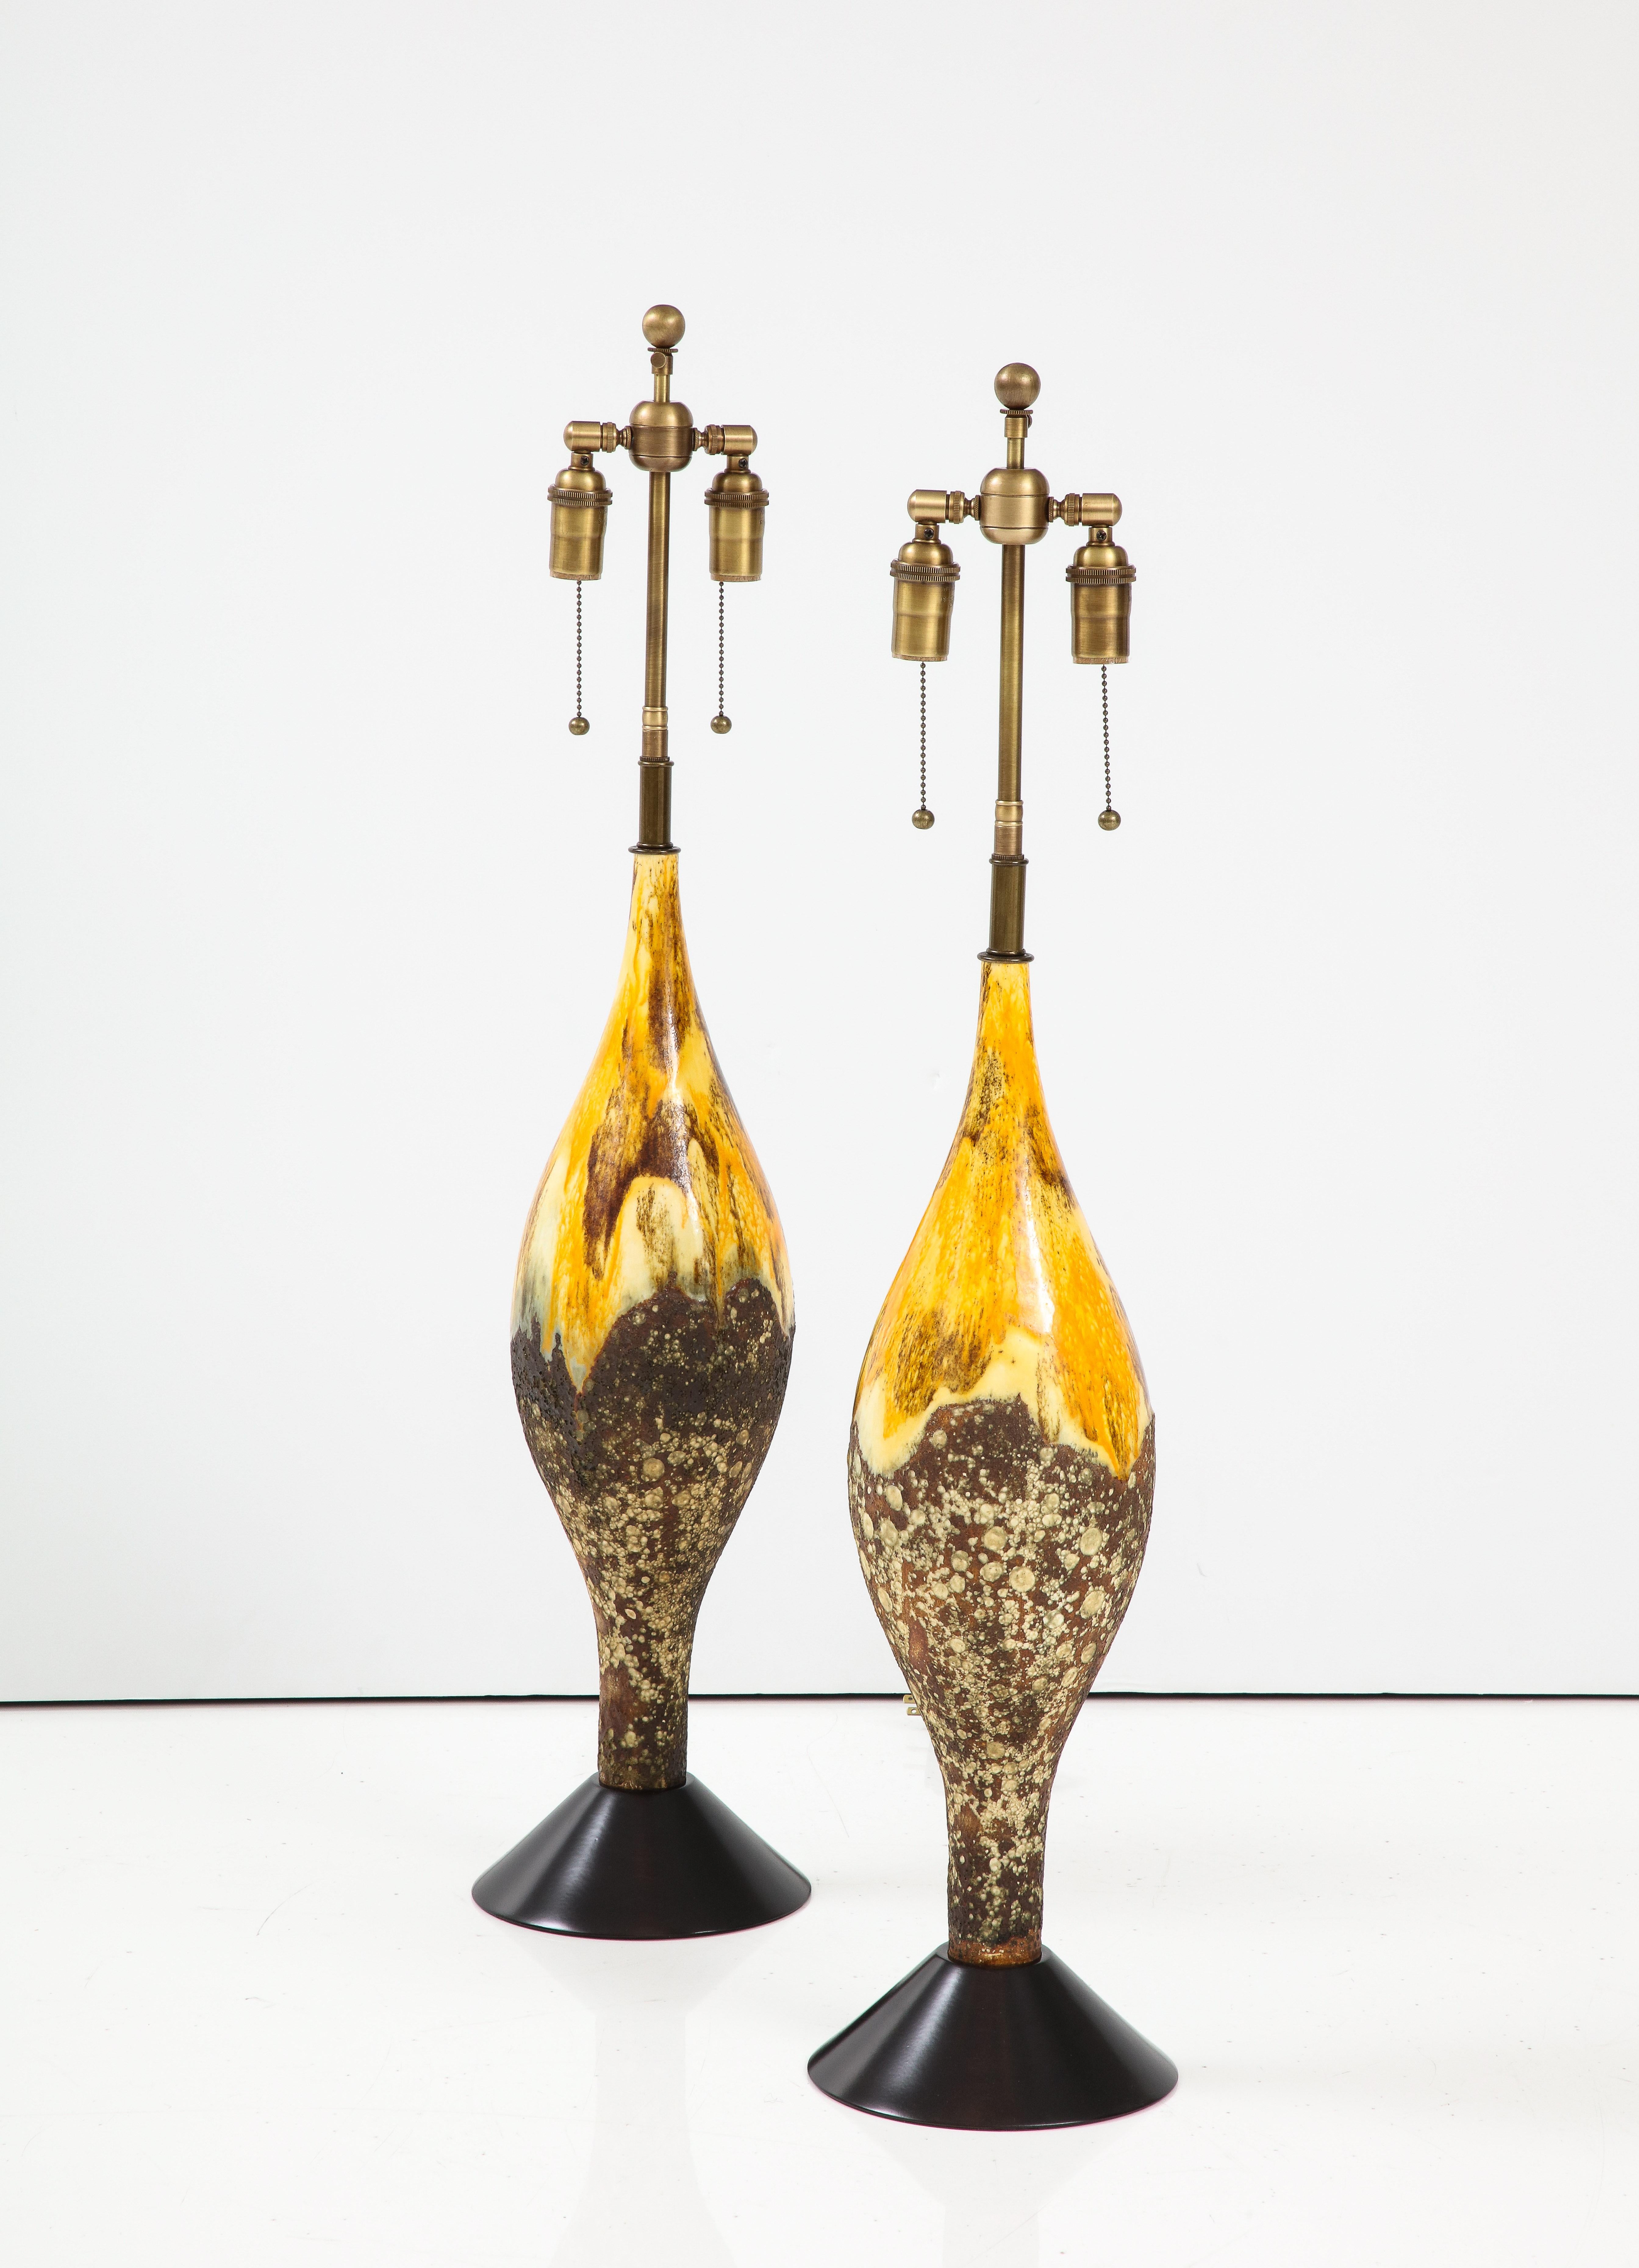 Pair of large Mid-Century ceramic lamps with a wonderful textured Volcanic
glazed finish. The lamps have been newly rewired with adjustable polished brass double clusters that take standard size light bulbs.
The height to the top of the ceramic is